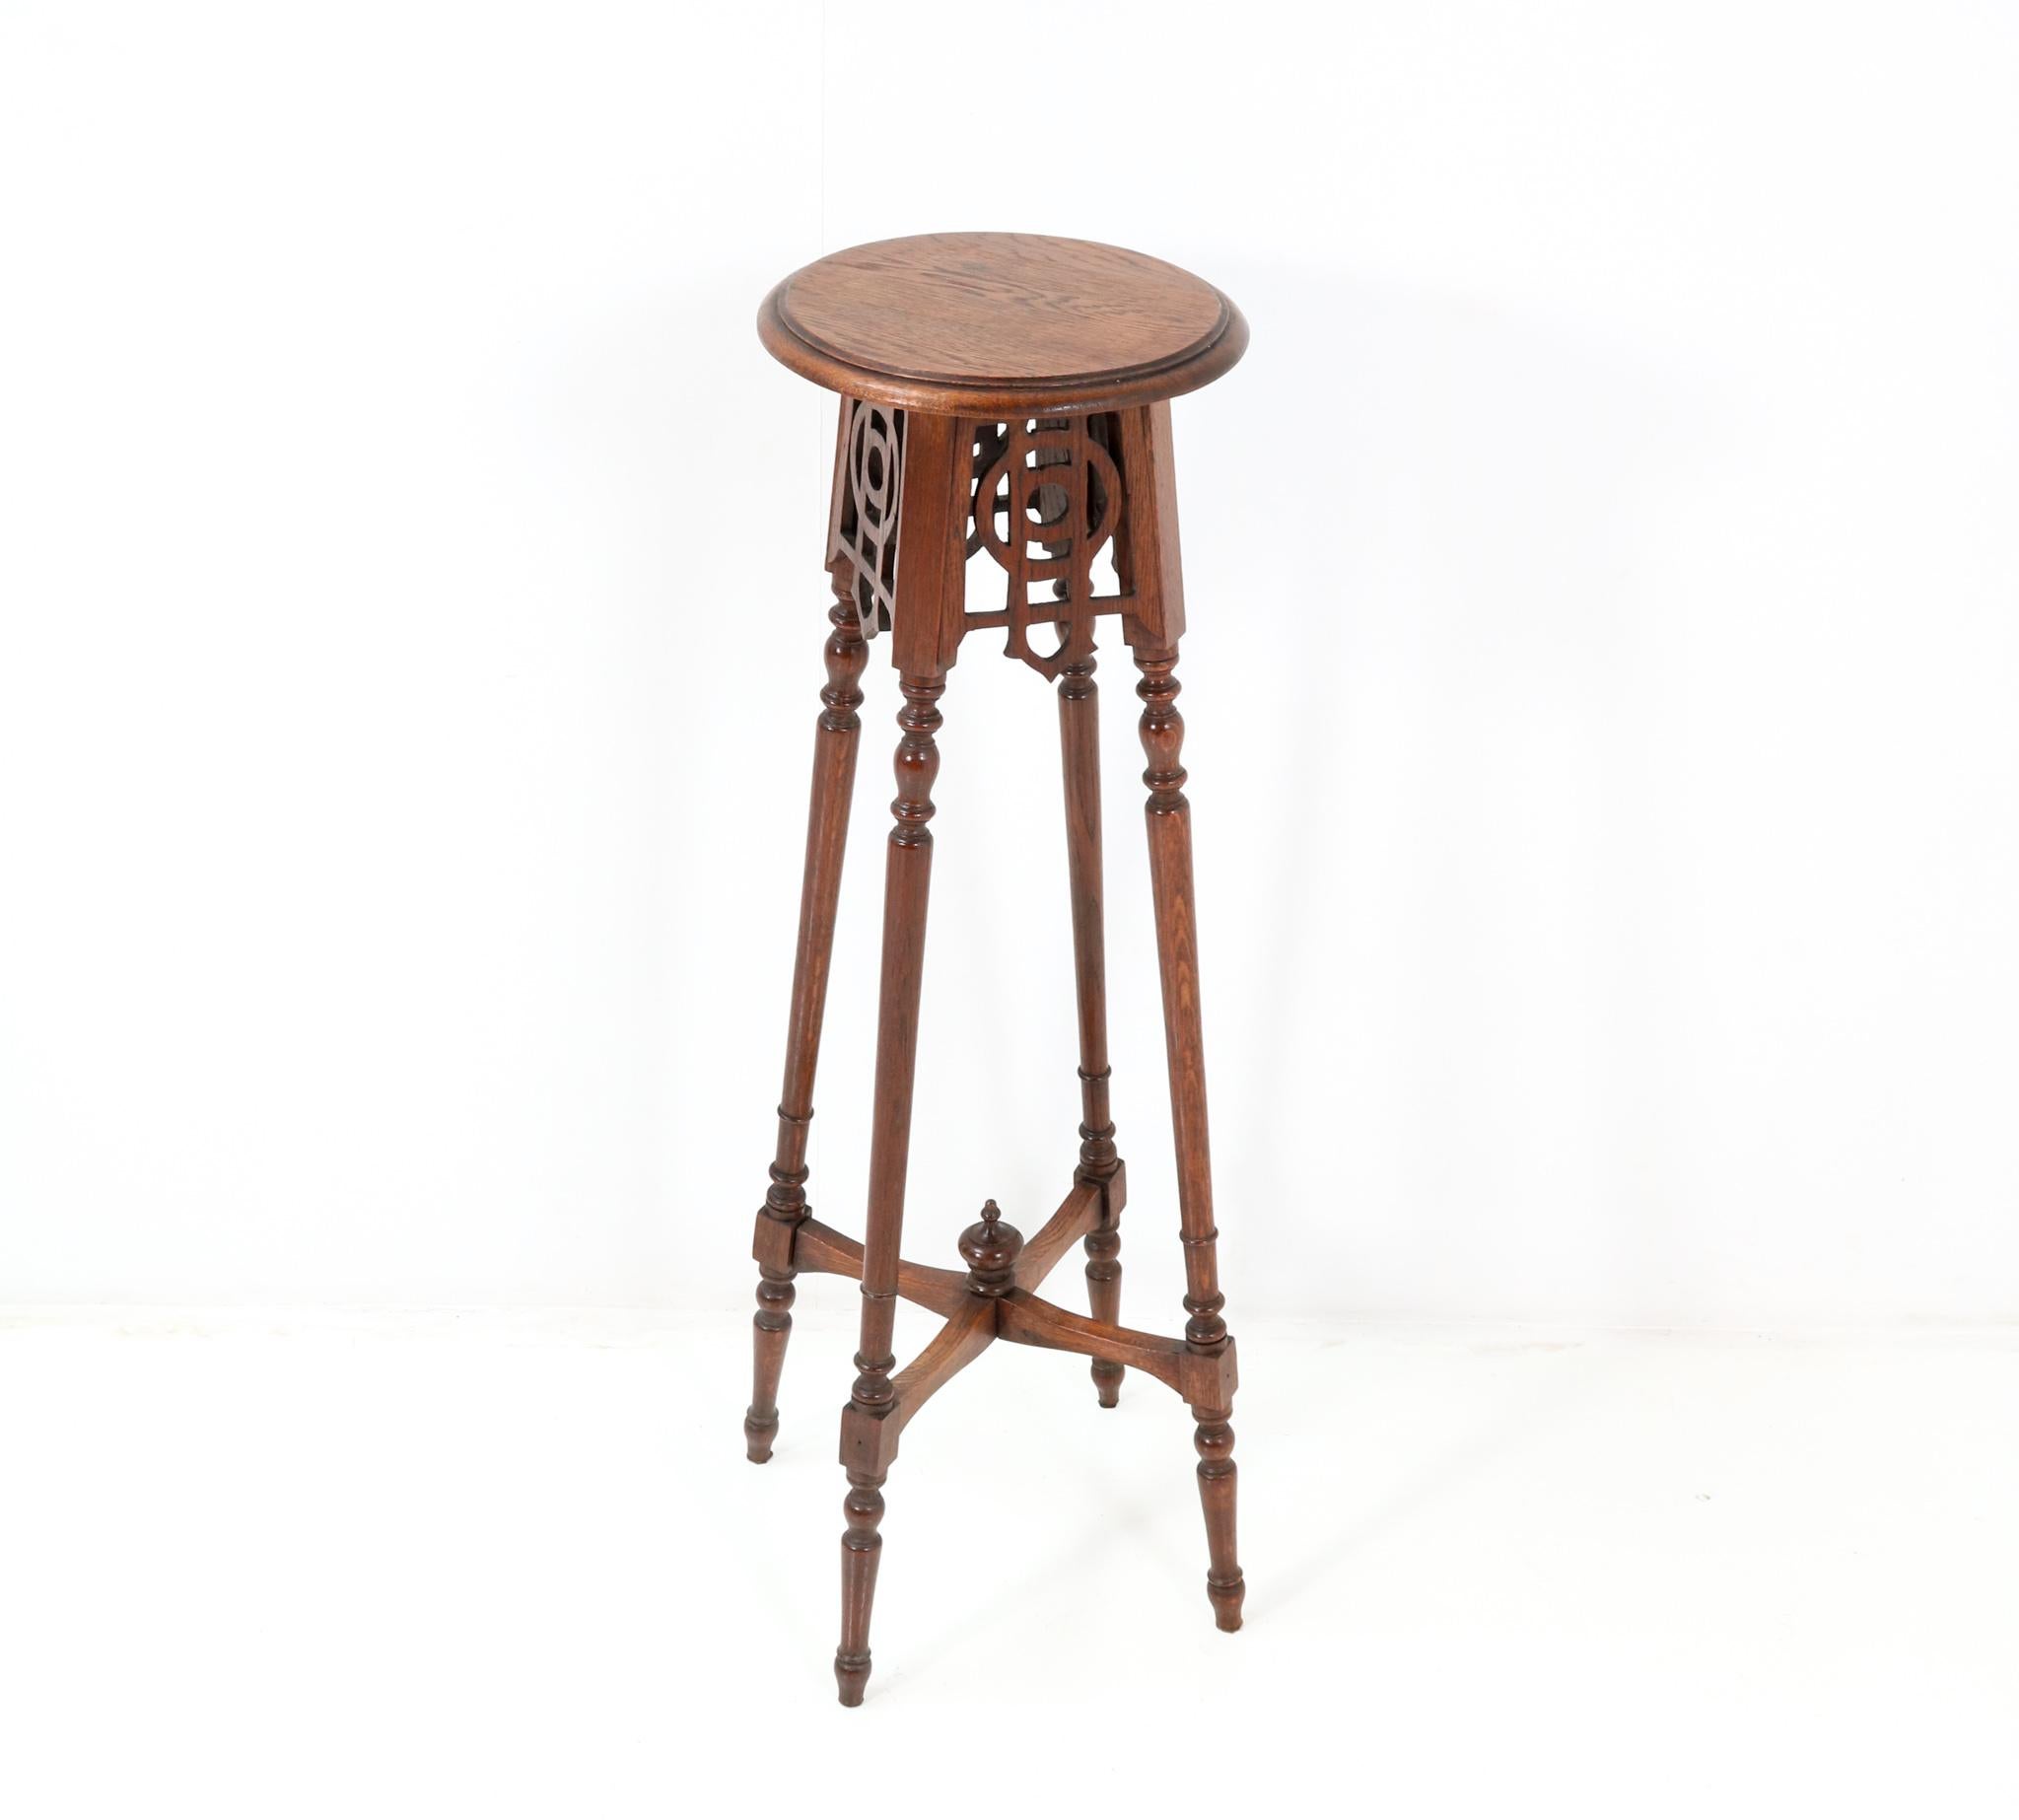 Oak Art Nouveau Pedestal Table or Plant Stand, 1900s In Good Condition For Sale In Amsterdam, NL